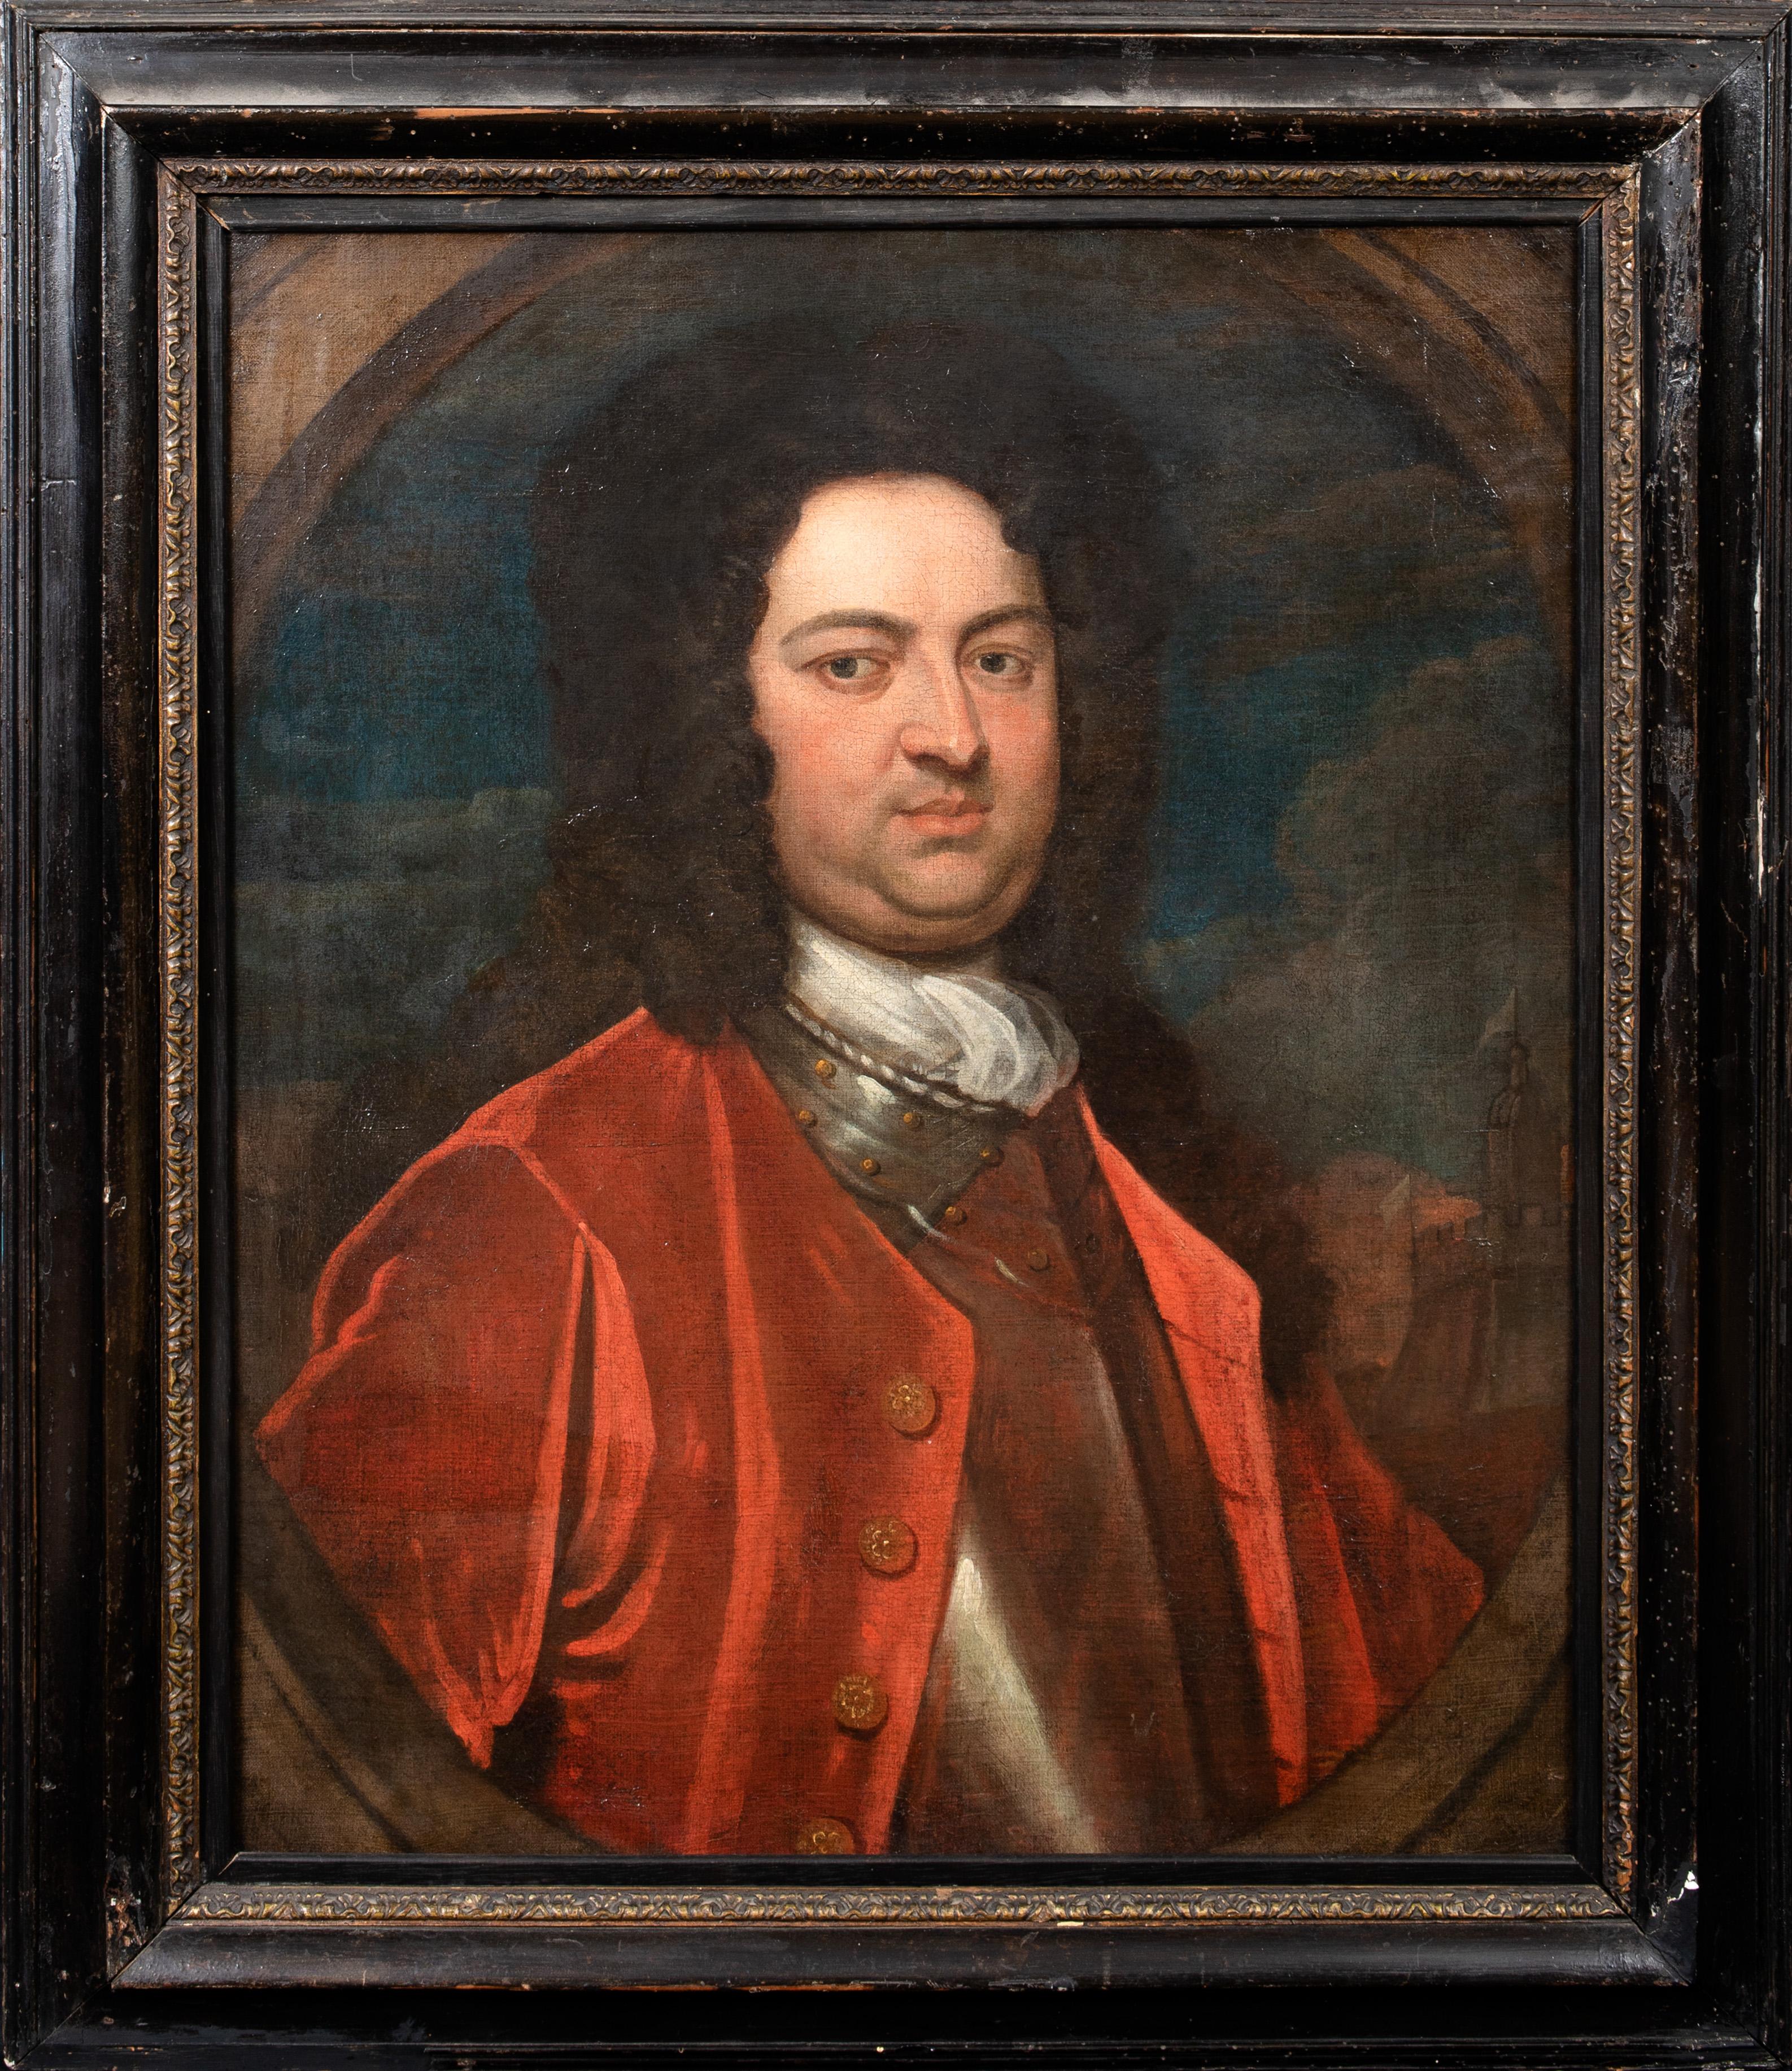 Portrait Of A Senior British Military Officer, Identified as Charles Sackville,  - Painting by Sir Godfrey Kneller